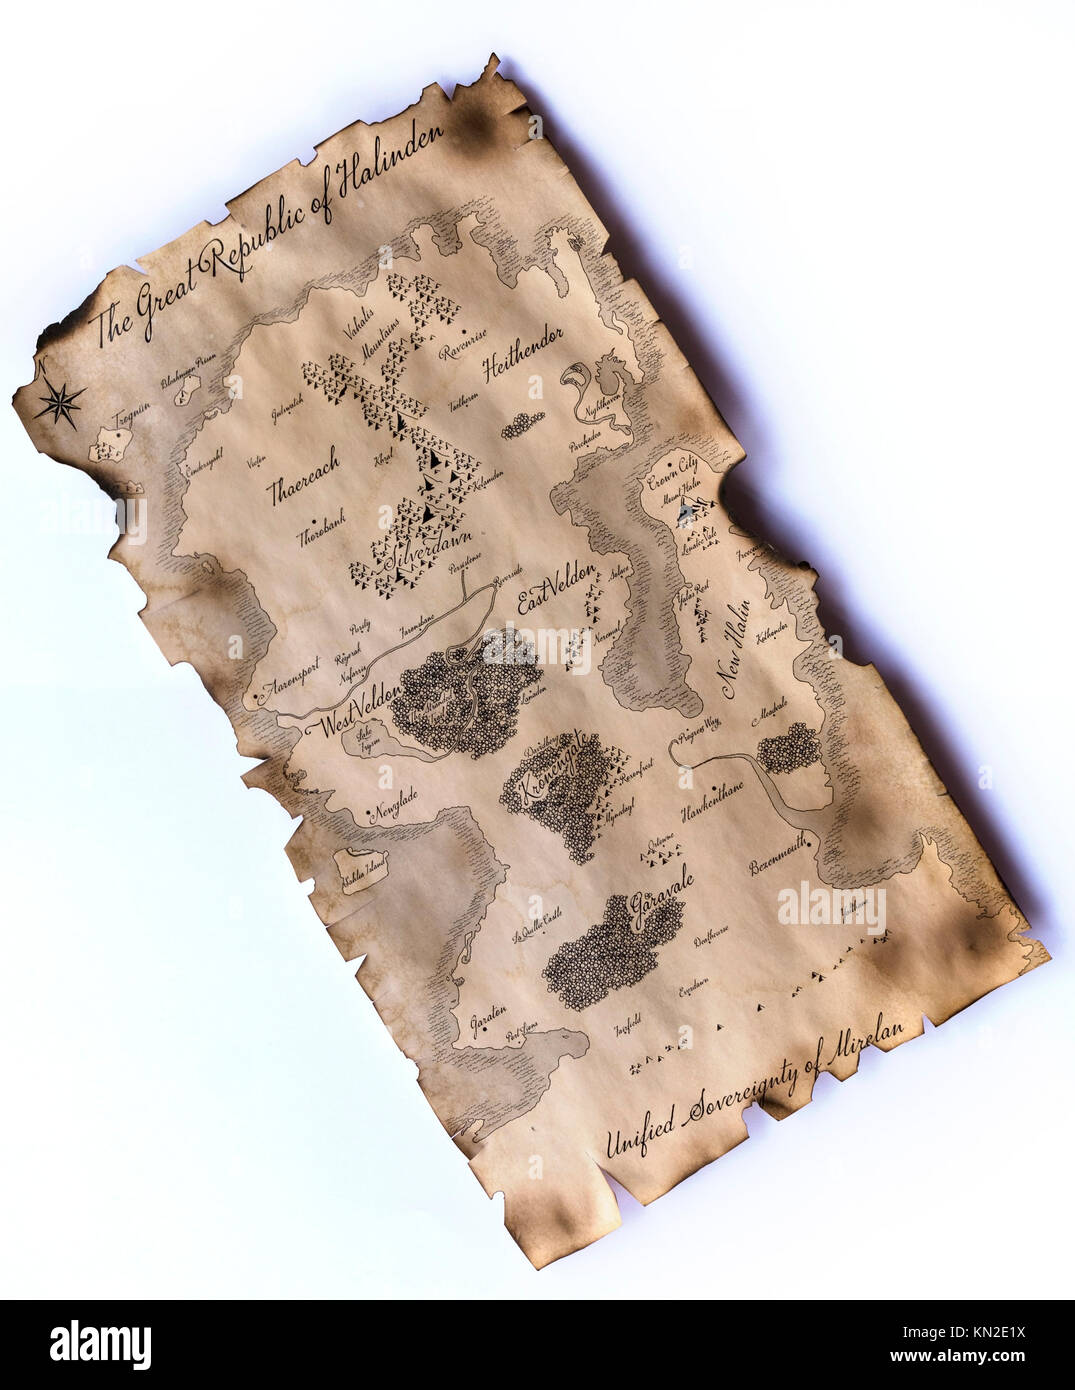 Fantasy roll playing game map Stock Photo